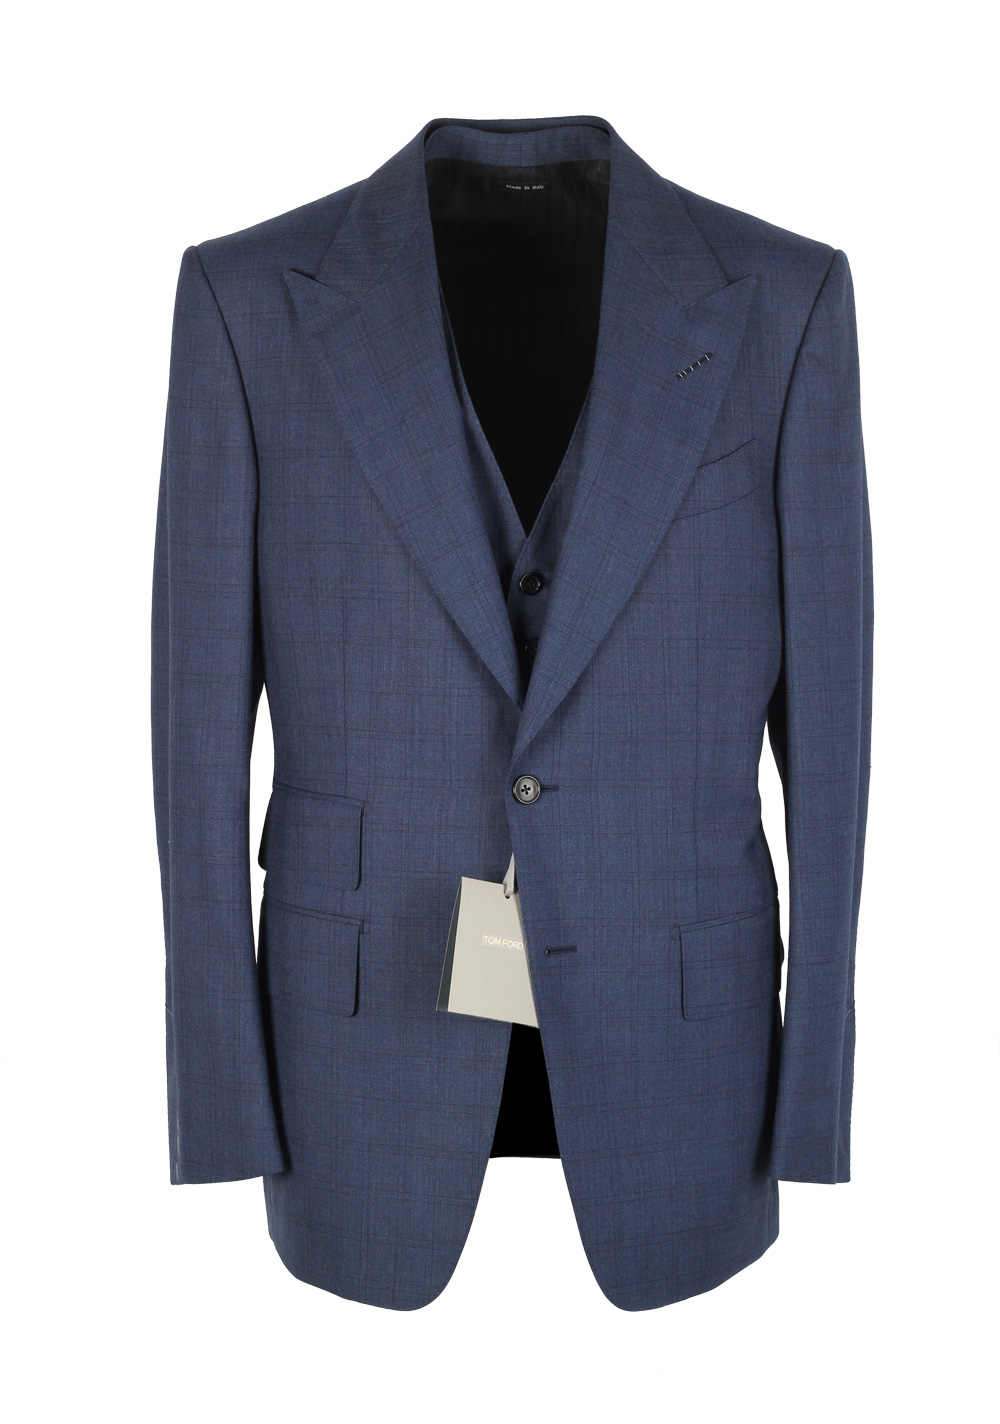 TOM FORD Windsor Checked Blue 3 Piece Suit Size 48 / 38R U.S. Wool Fit ...